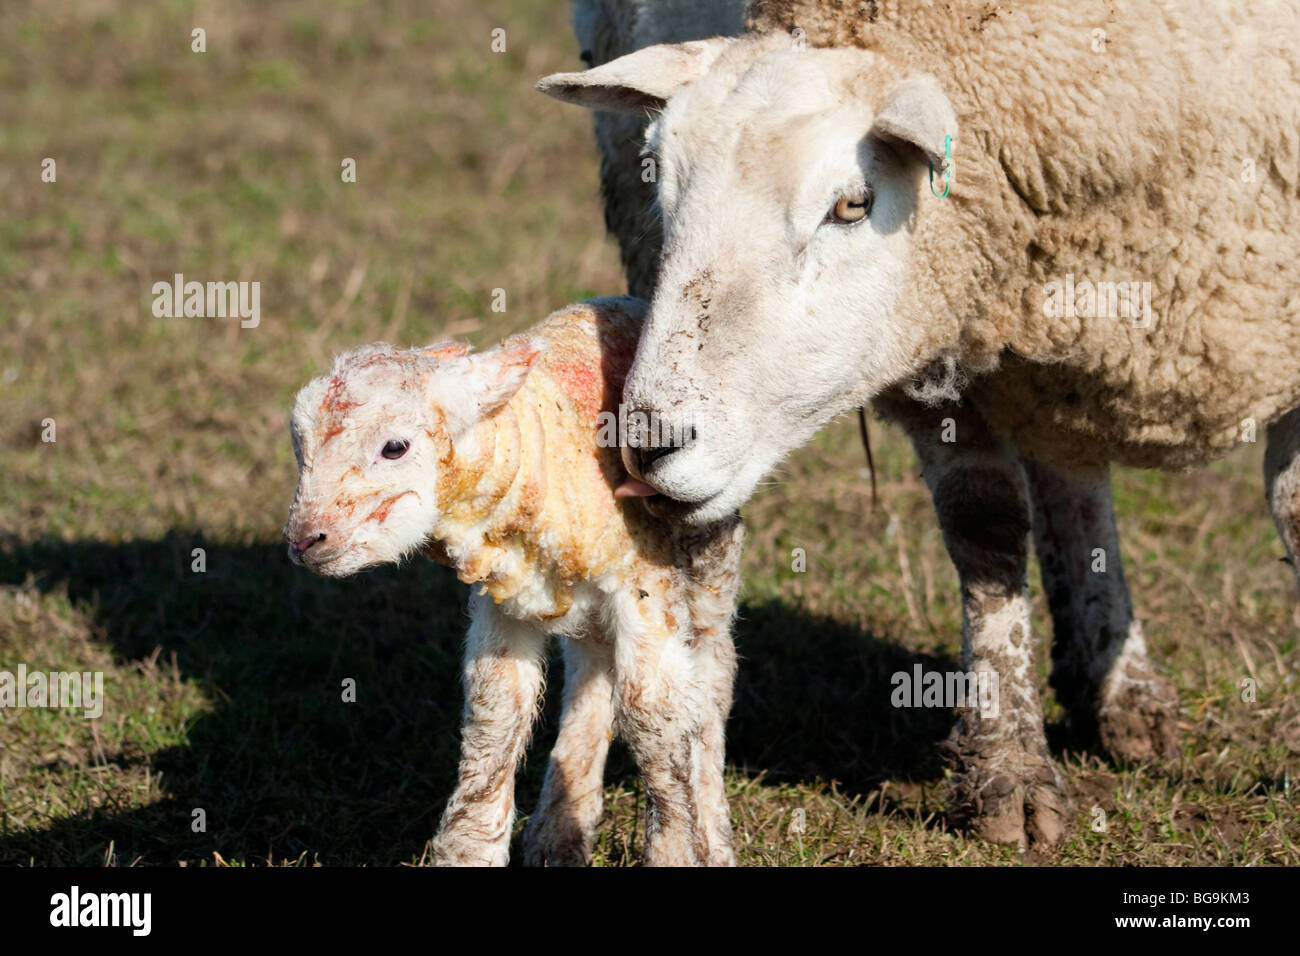 Newborn lamb being licked clean by its mother Stock Photo